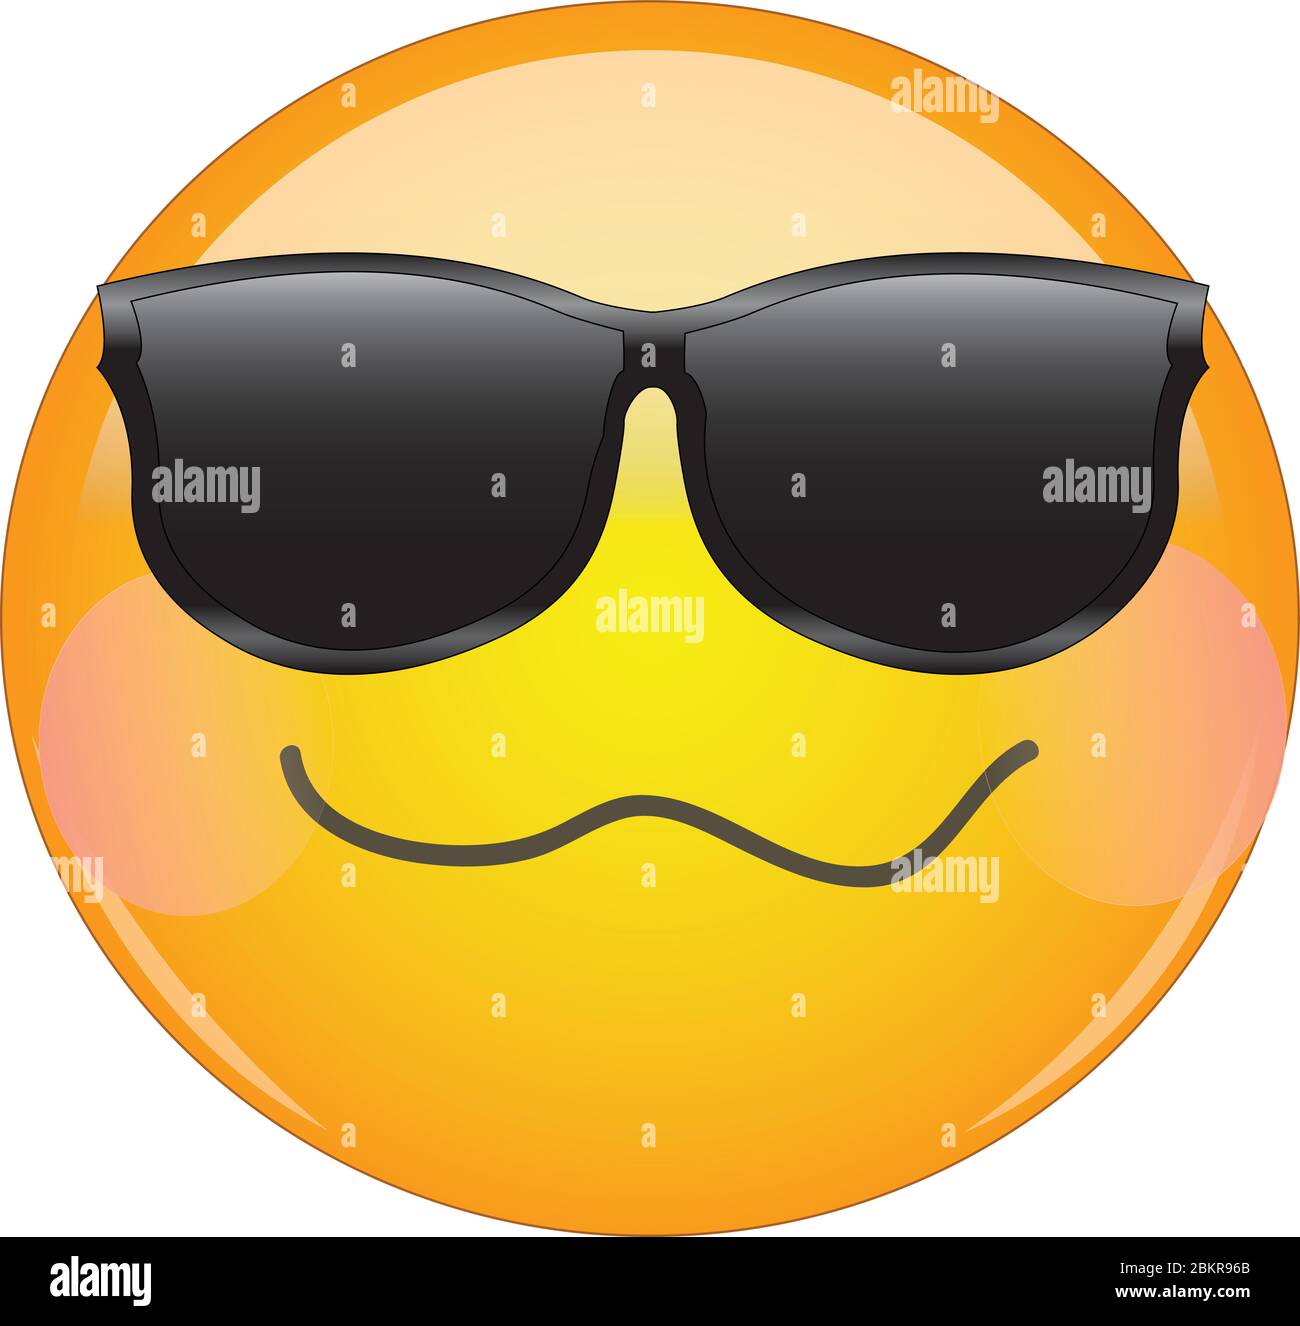 Cool drunken blushing emoji. Yellow face emoticon wearing sunglasses with a crumpled mouth, and blush on cheeks expressing drunken state of mind. Stock Vector